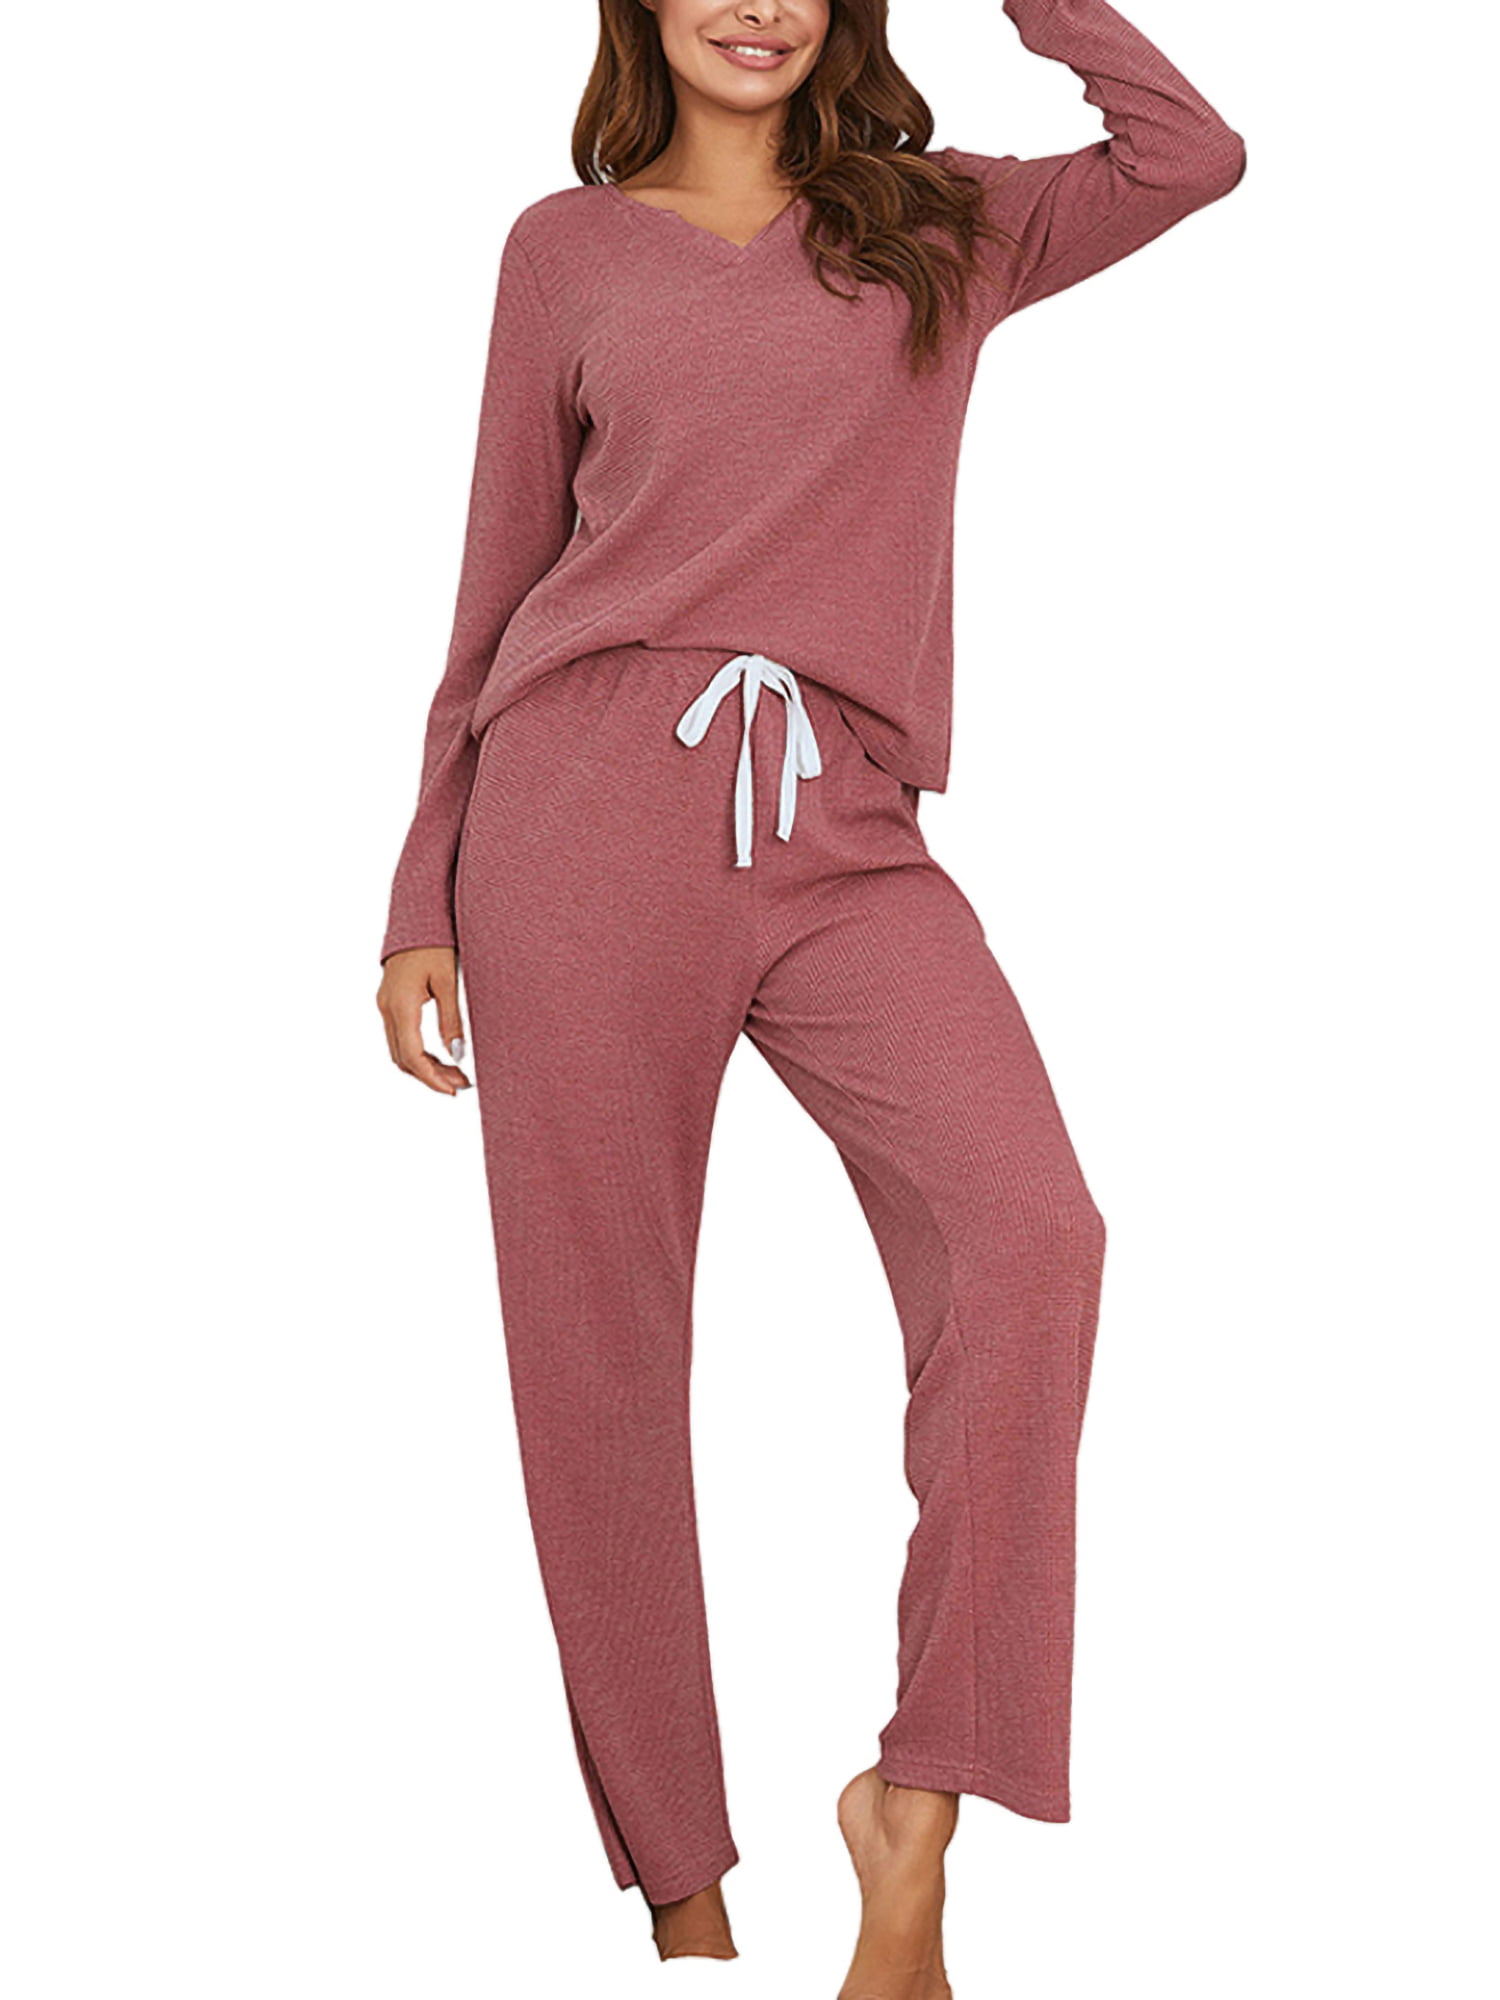 Women 2 Piece Tracksuit Joggers High Low Top and Bottoms Casual Loungewear Knitted Outfit